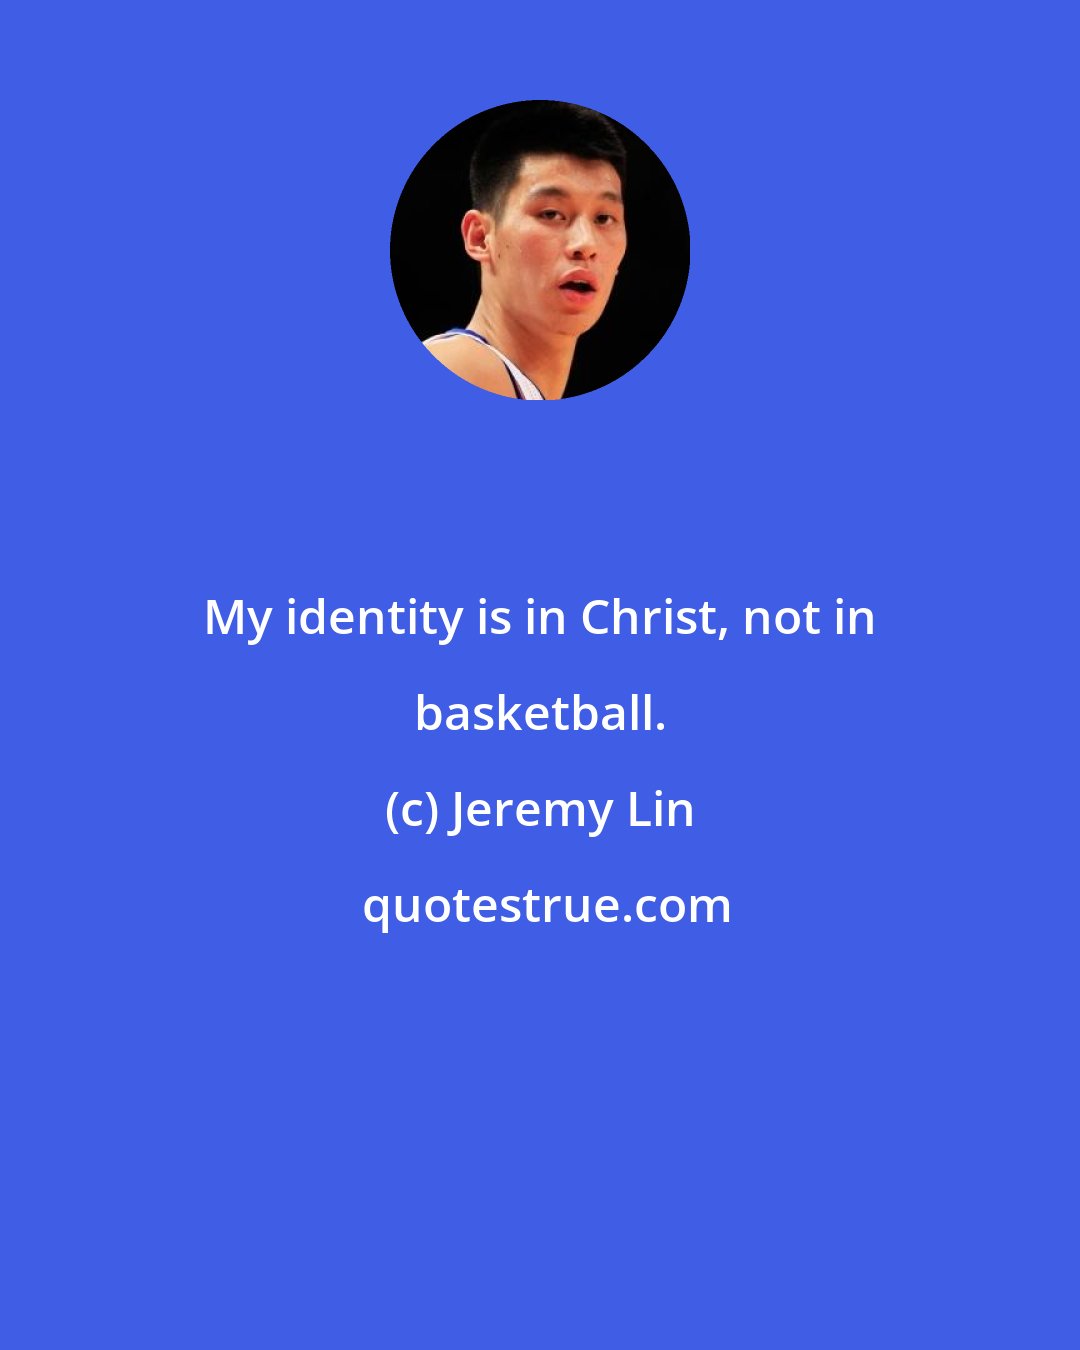 Jeremy Lin: My identity is in Christ, not in basketball.